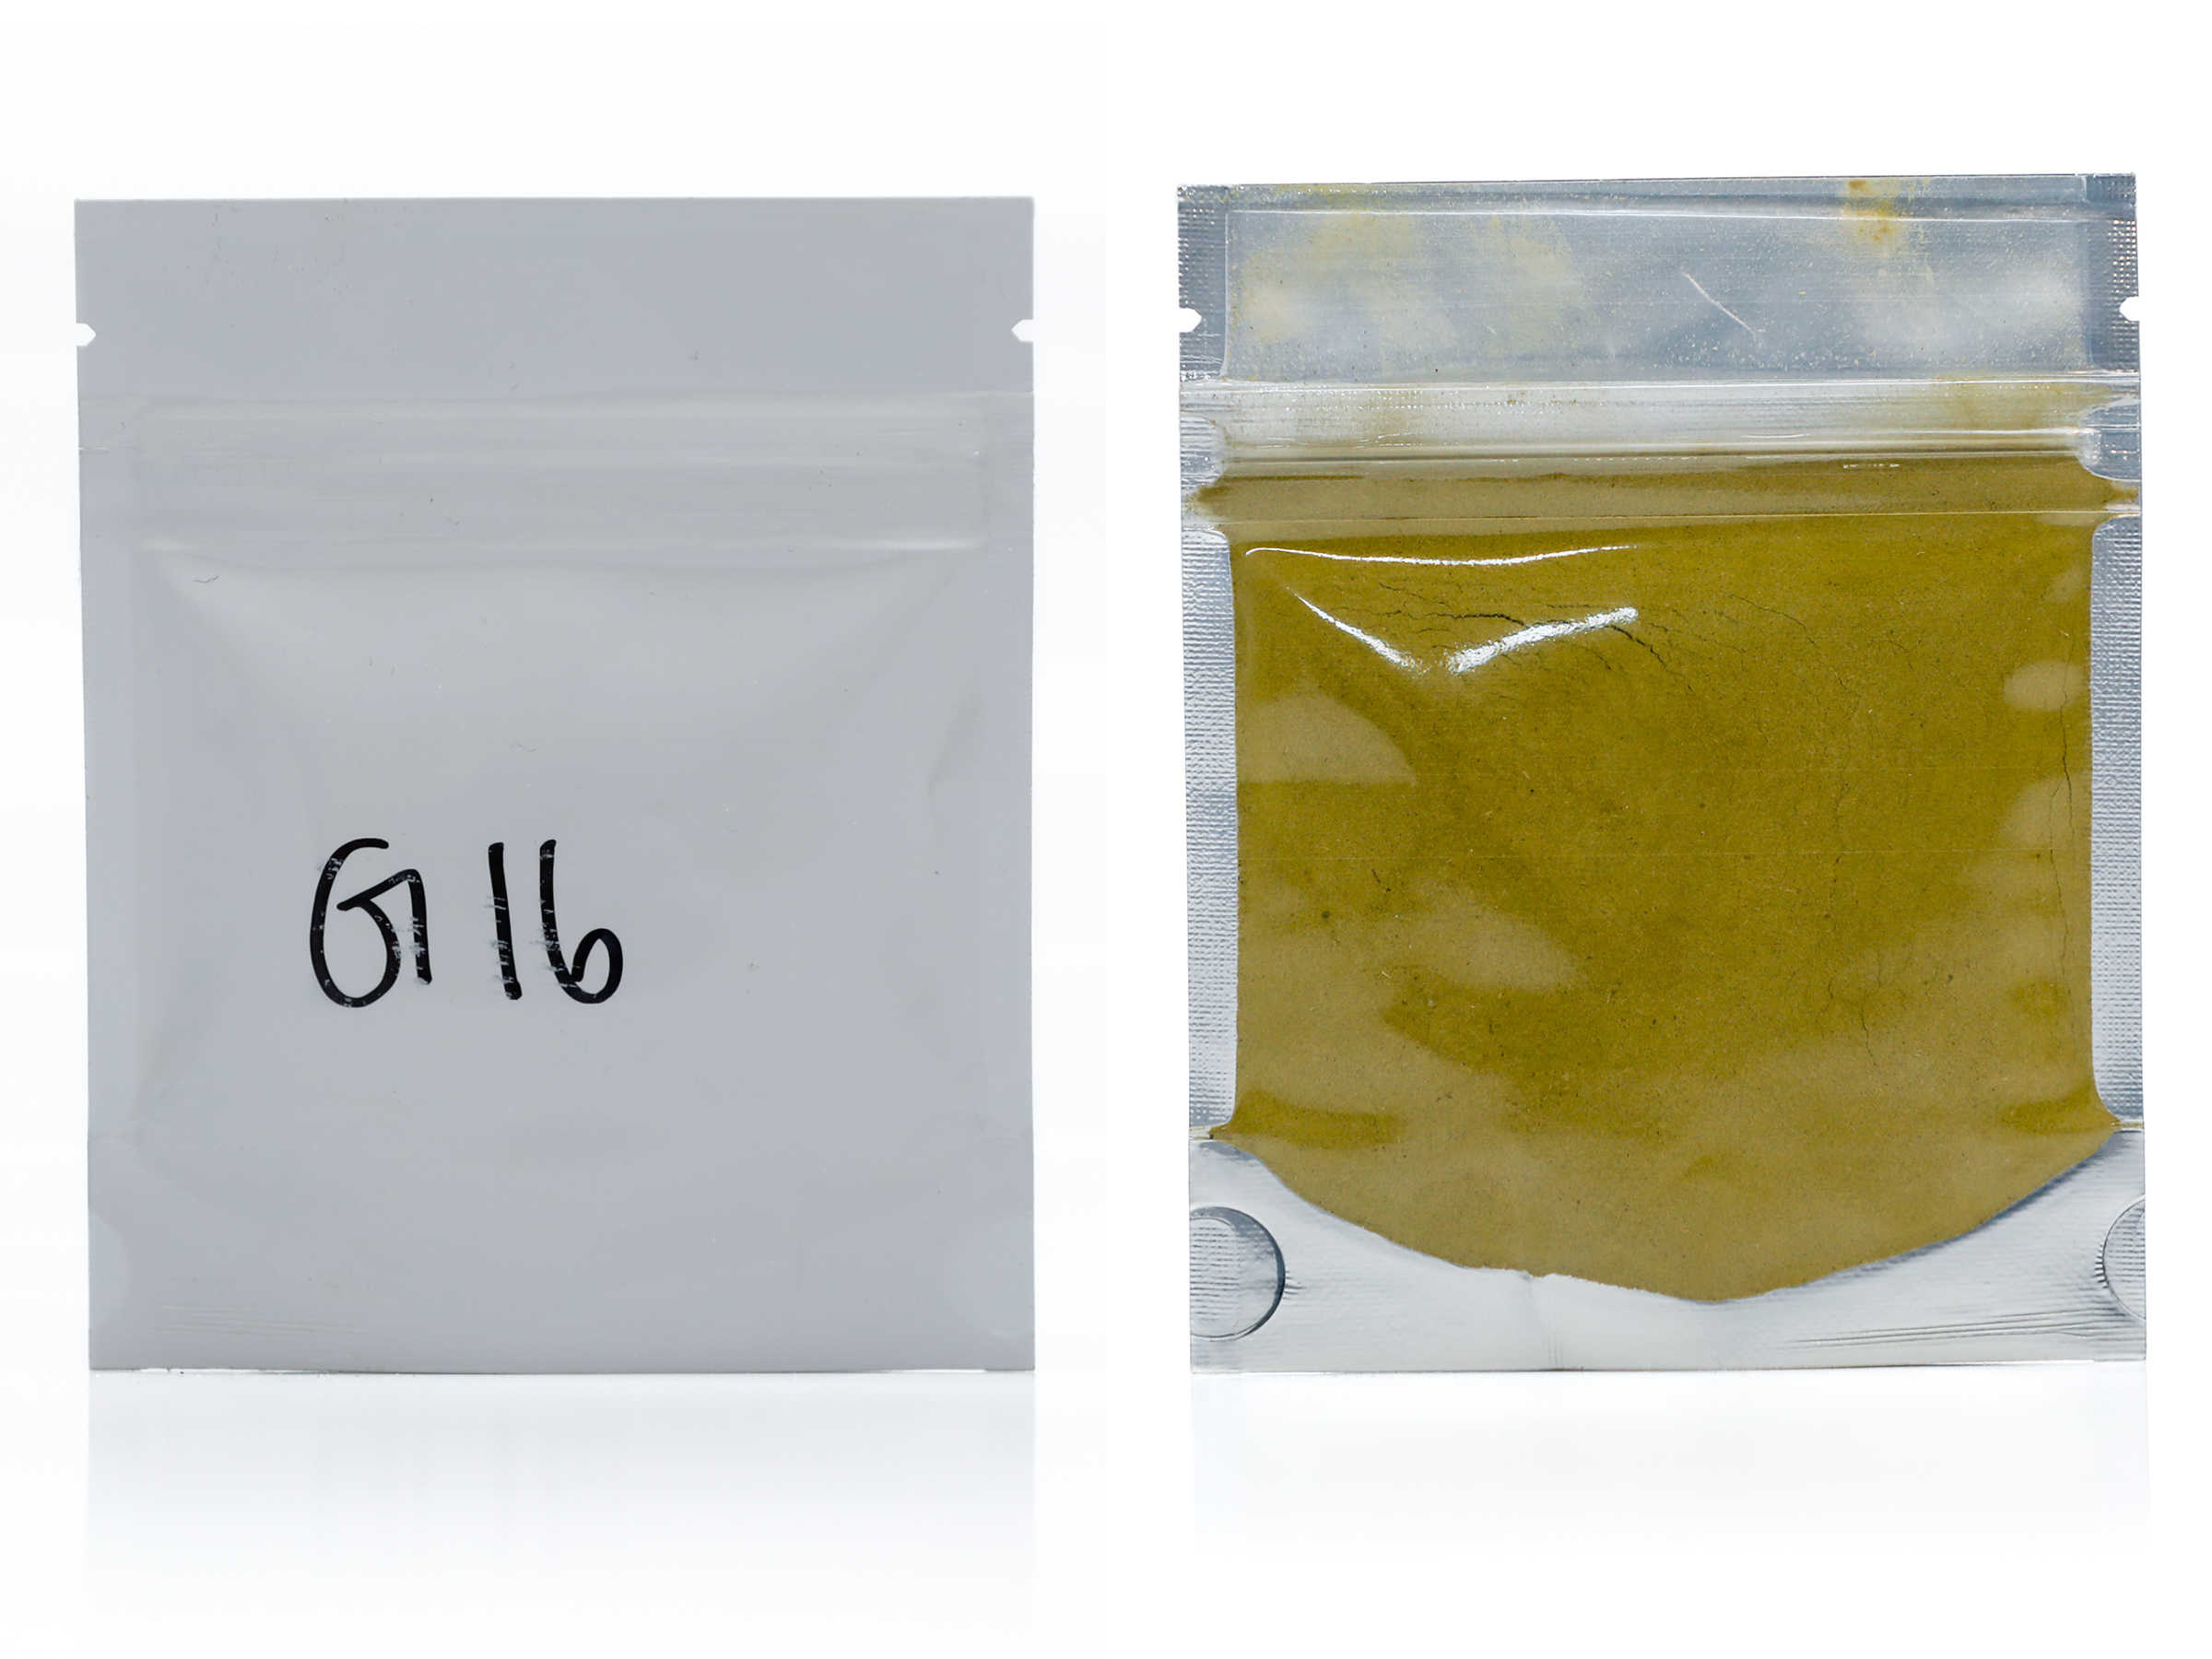 The Times ordered one kratom product from Idaho-based The Kratom Distro, which also sent two complimentary powders, including one that appeared to say “G16” with no other labeling.